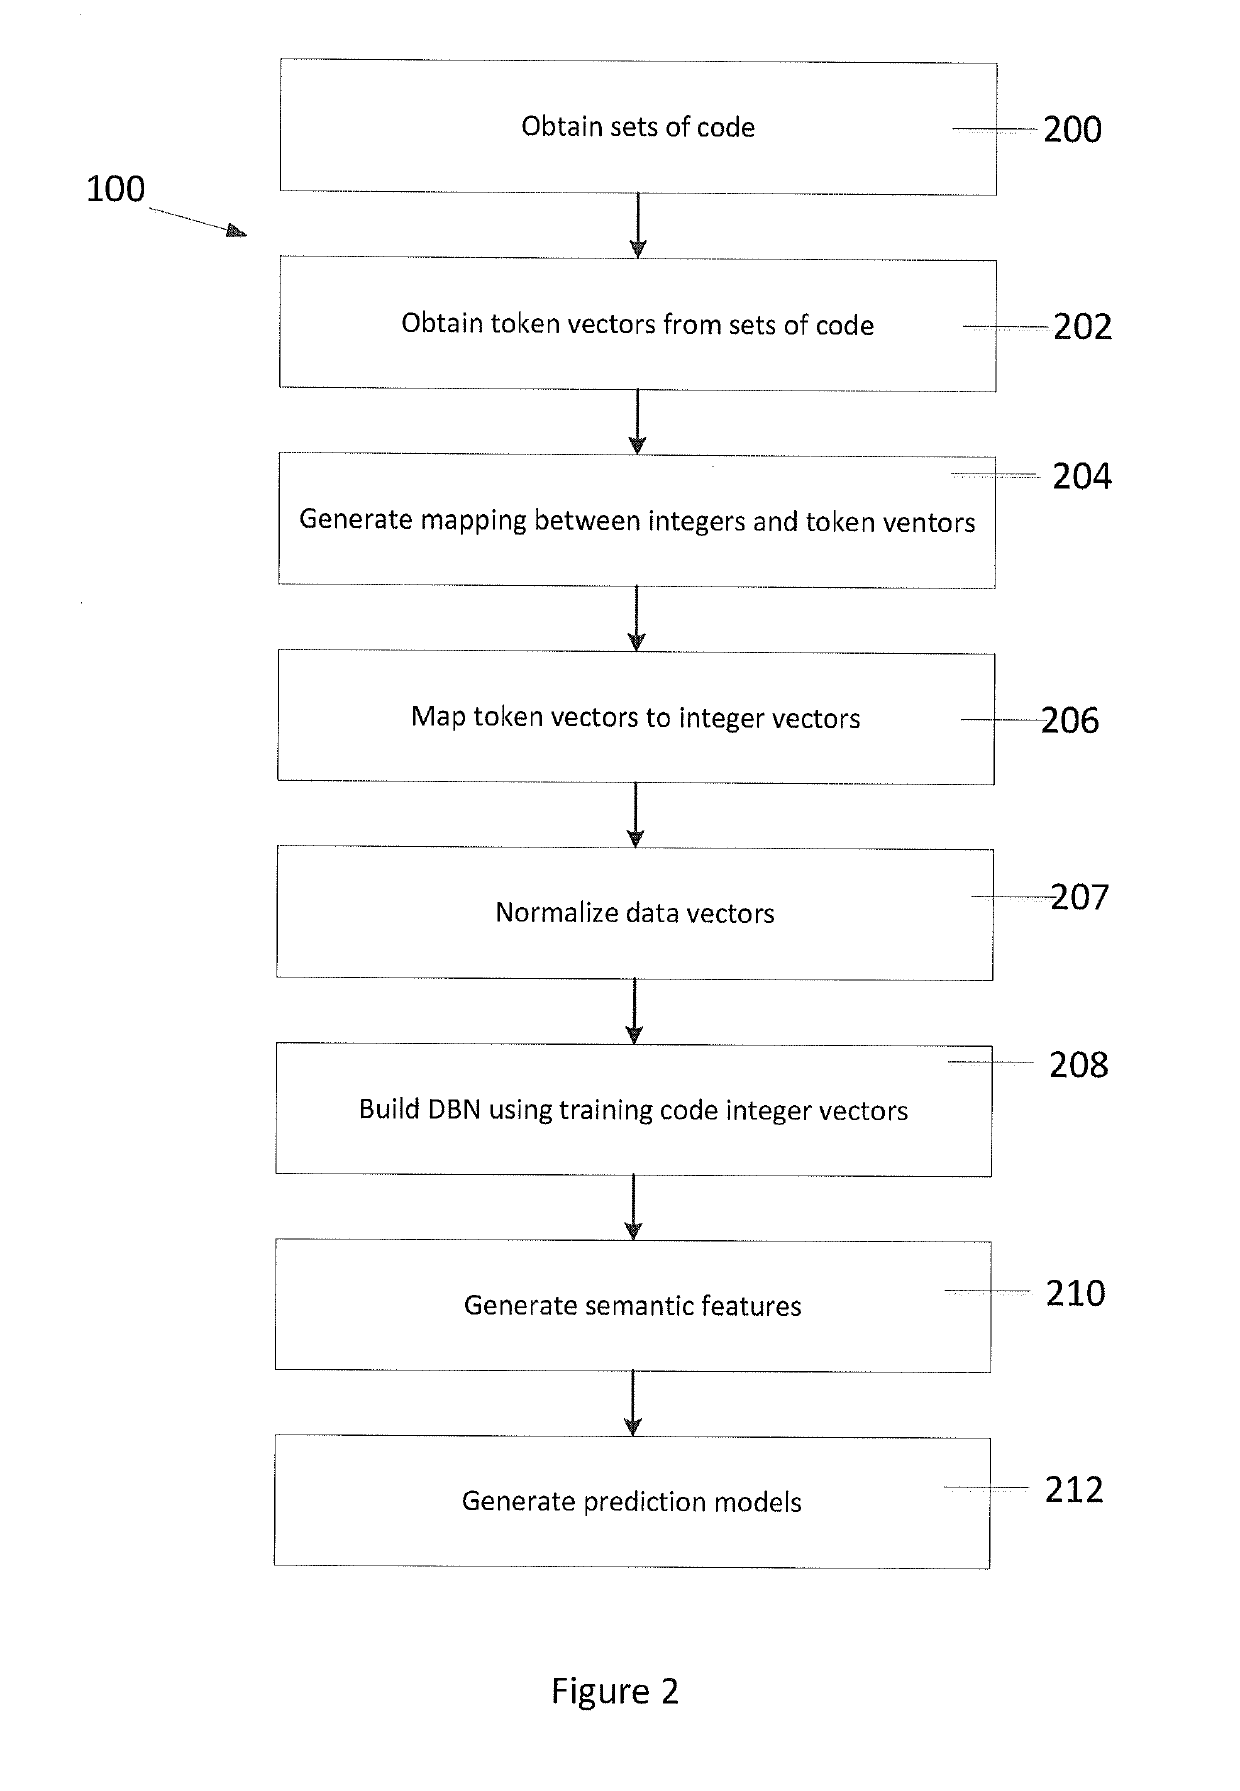 Method for determining defects and vulnerabilities in software code